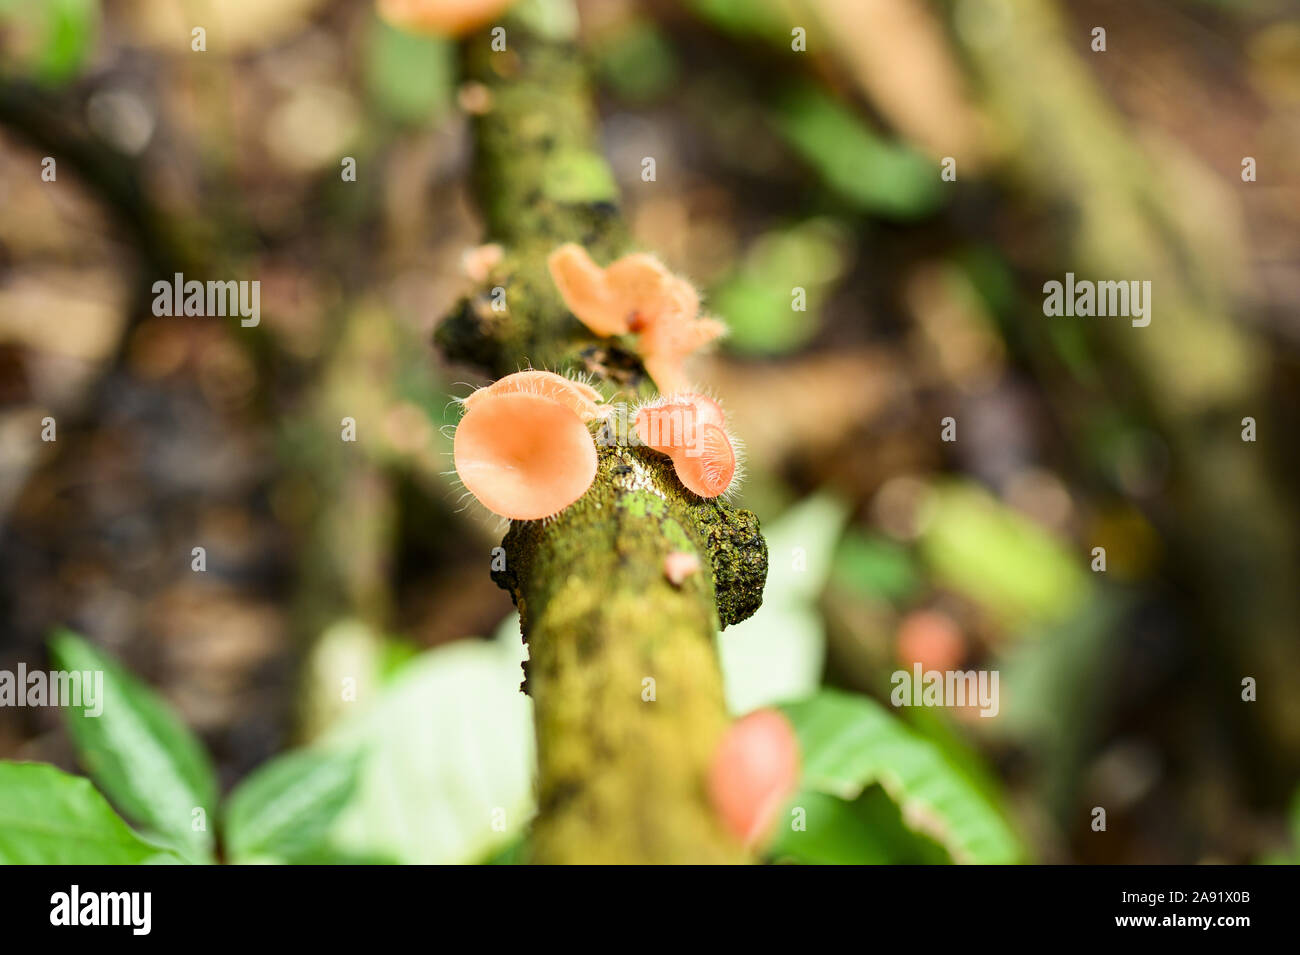 (Selective Focus) Close-up view of some Cookeina mushrooms. Cookeina is a genus of cup fungi in the family Sarcoscyphaceae. Stock Photo